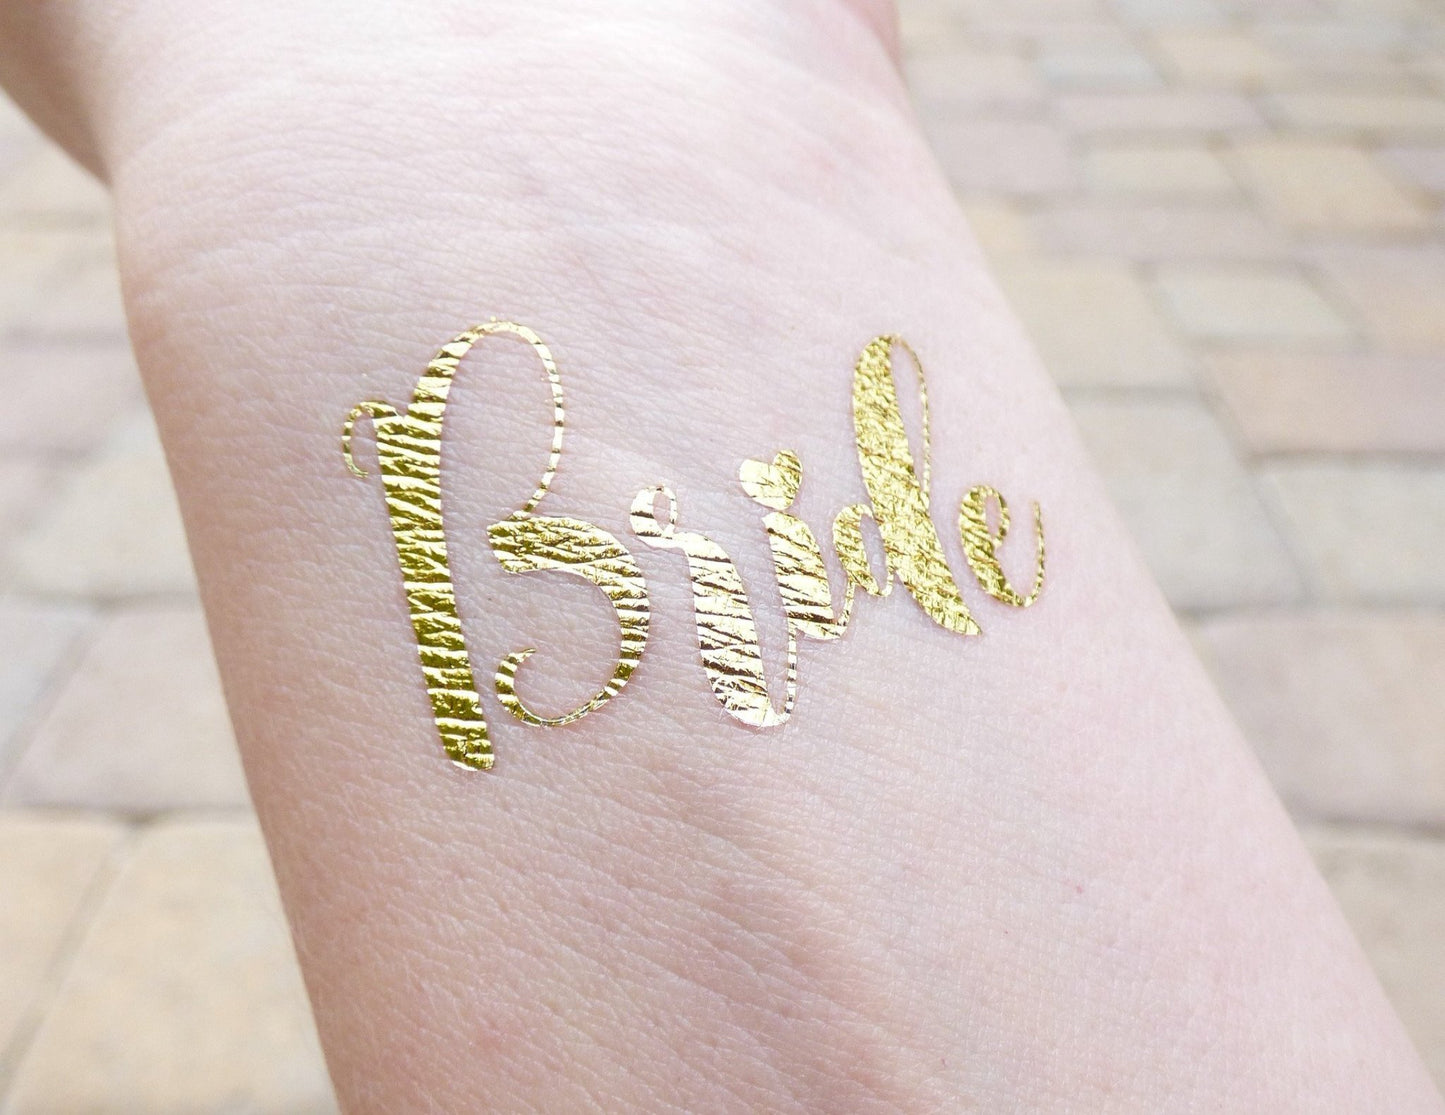 Bride temporary tattoo on wrist for bachelorette party